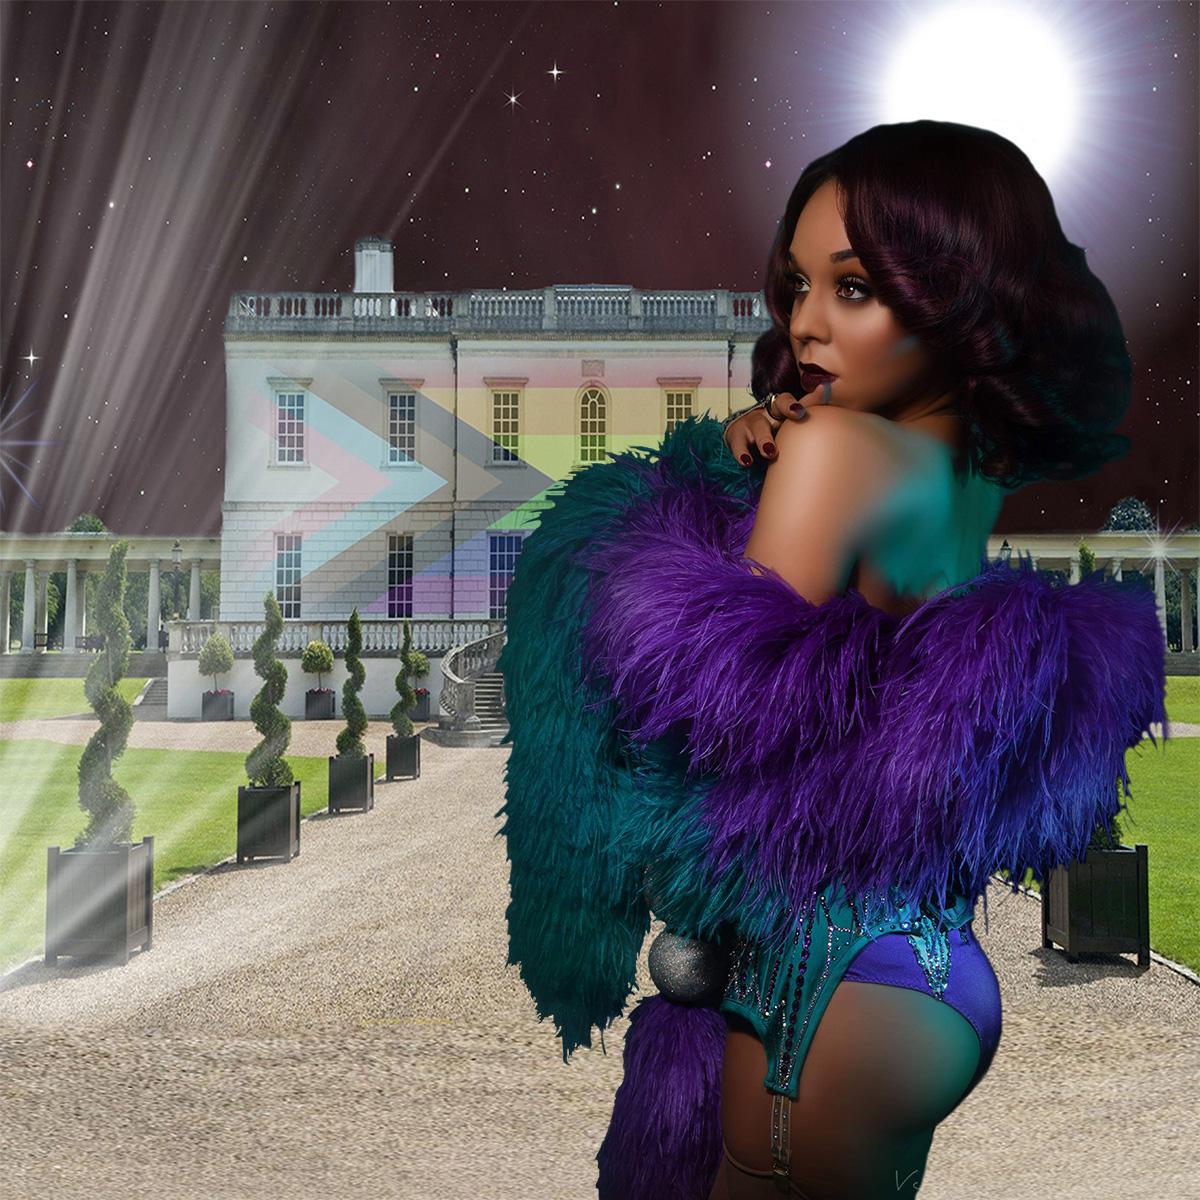 Demi Noire stands in front of the Queen's House that is illuminated with the Progress Pride flag, she wears a purple and green feather bower that is draped across her shoulder. 